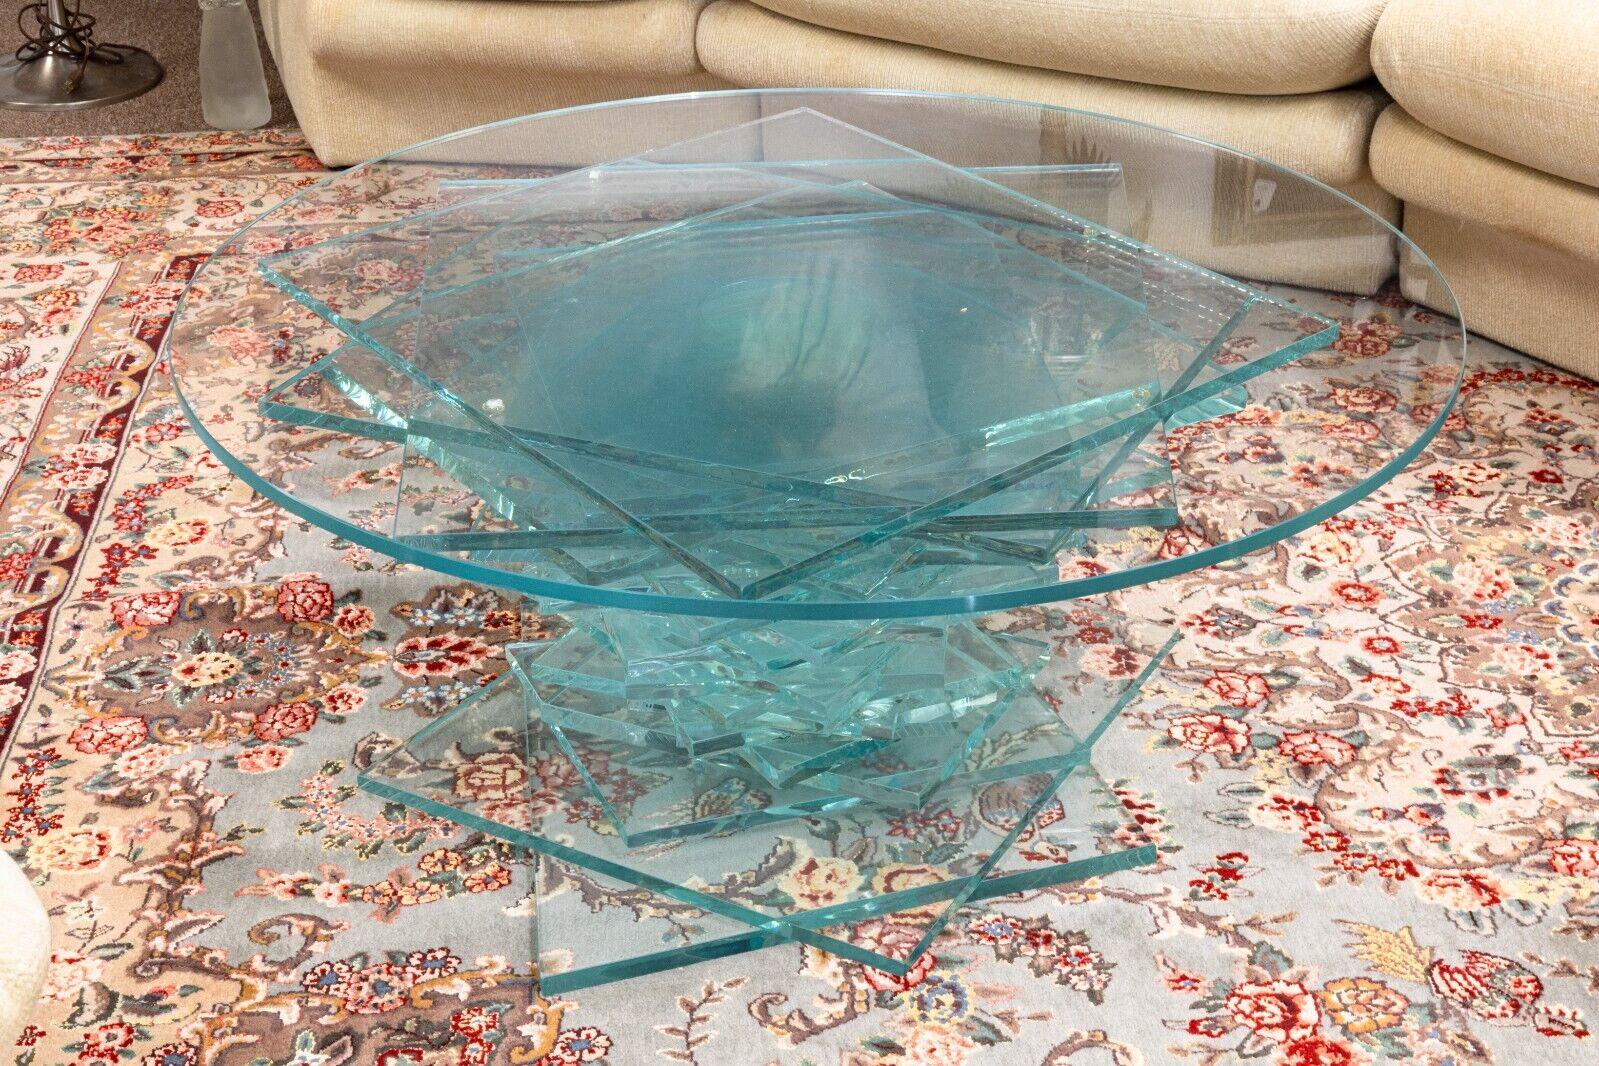 A round stacked helix contemporary modern glass coffee table. This is a stunning coffee table with a very unique helix design. This table is made completely of glass stacked together. There is a hallow cylinder down the center as pictured above.